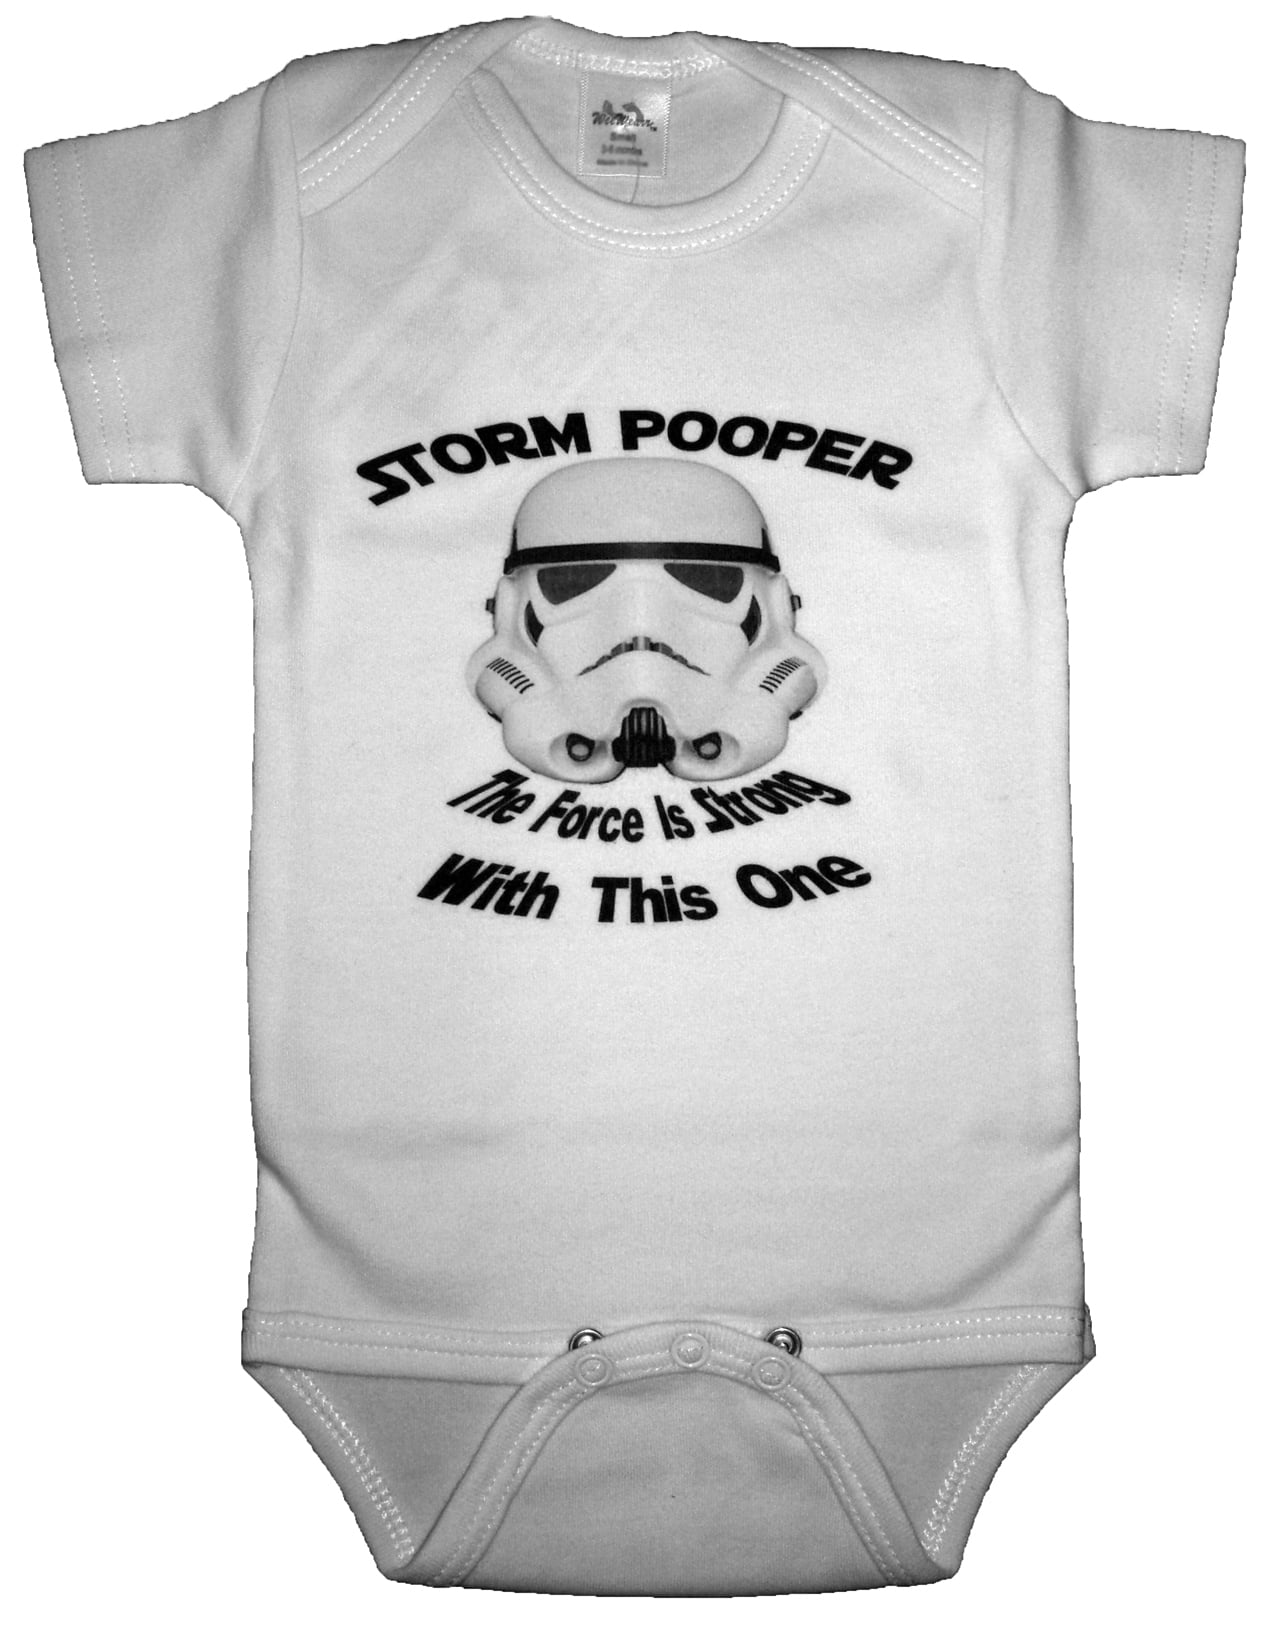 Storm Pooper Funny Baby Romper White Size 3-6 Month - Walmart.com